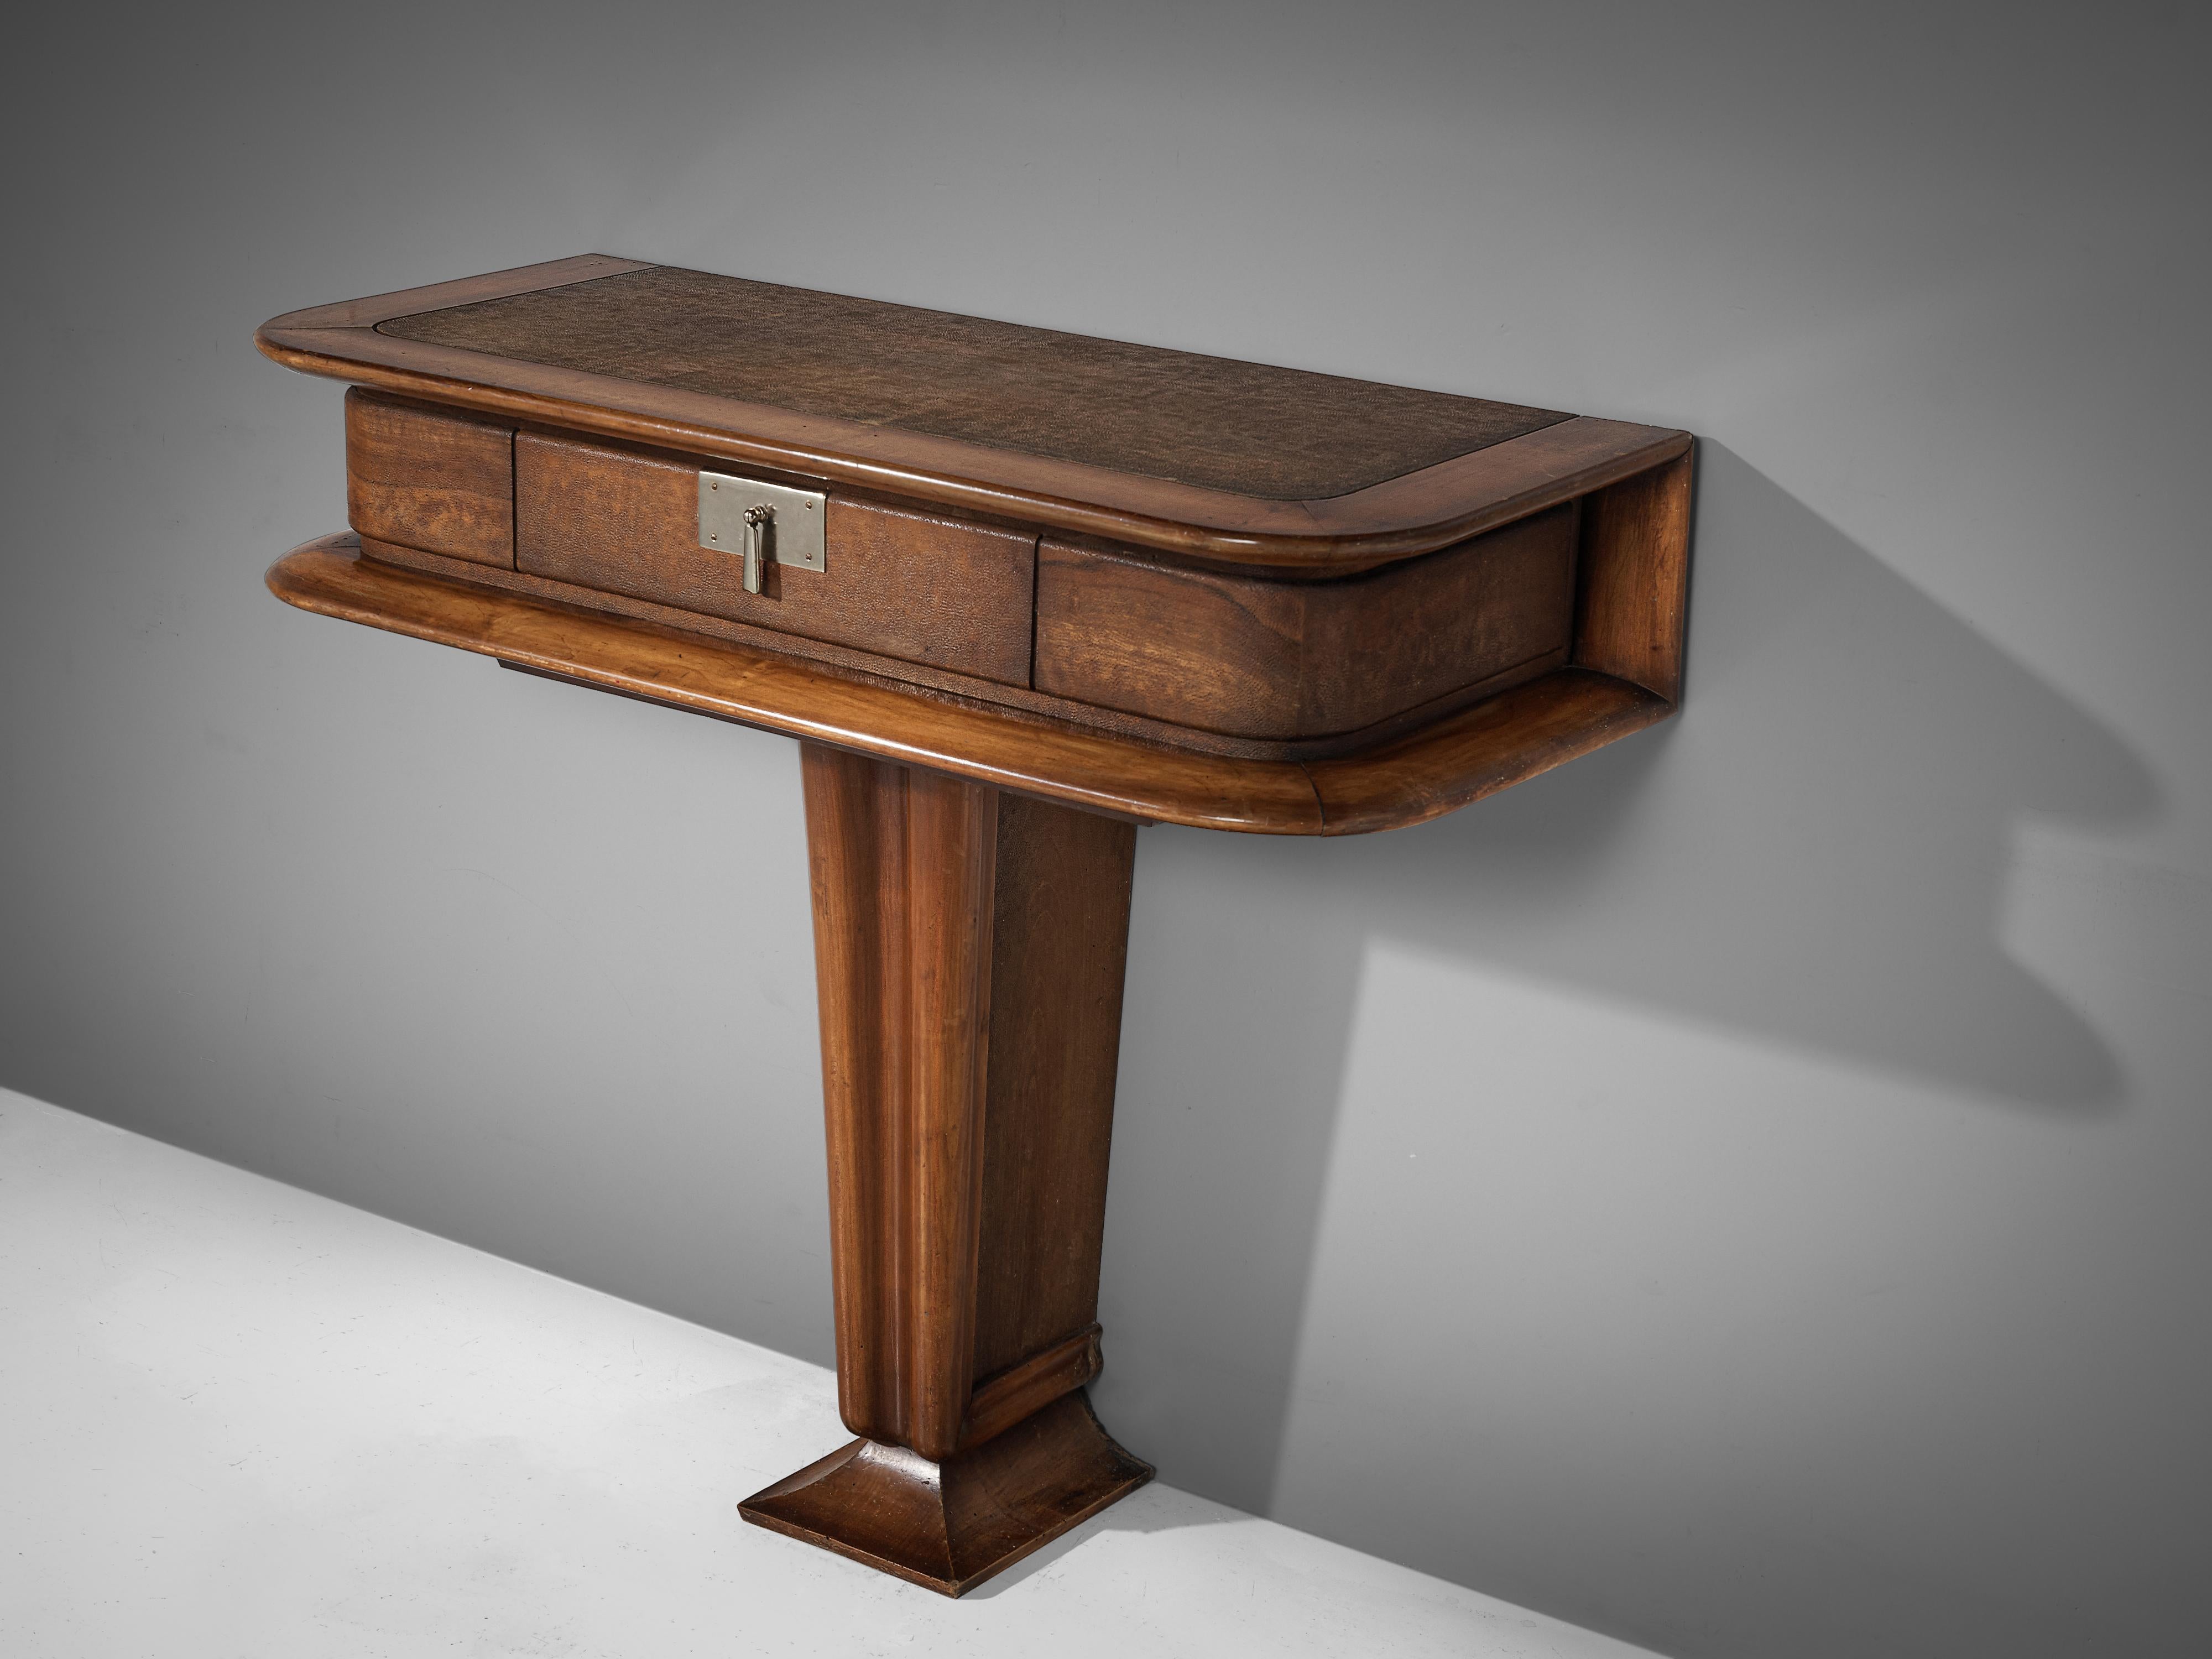 Vittorio Valabrega, console with drawer, walnut, leather, metal, Italy, 1940s

This console by the Italian designer Vittorio Valabrega is sculptural and elegant. Note the details in the base or the fine lines that surround the drawer. A metal handle